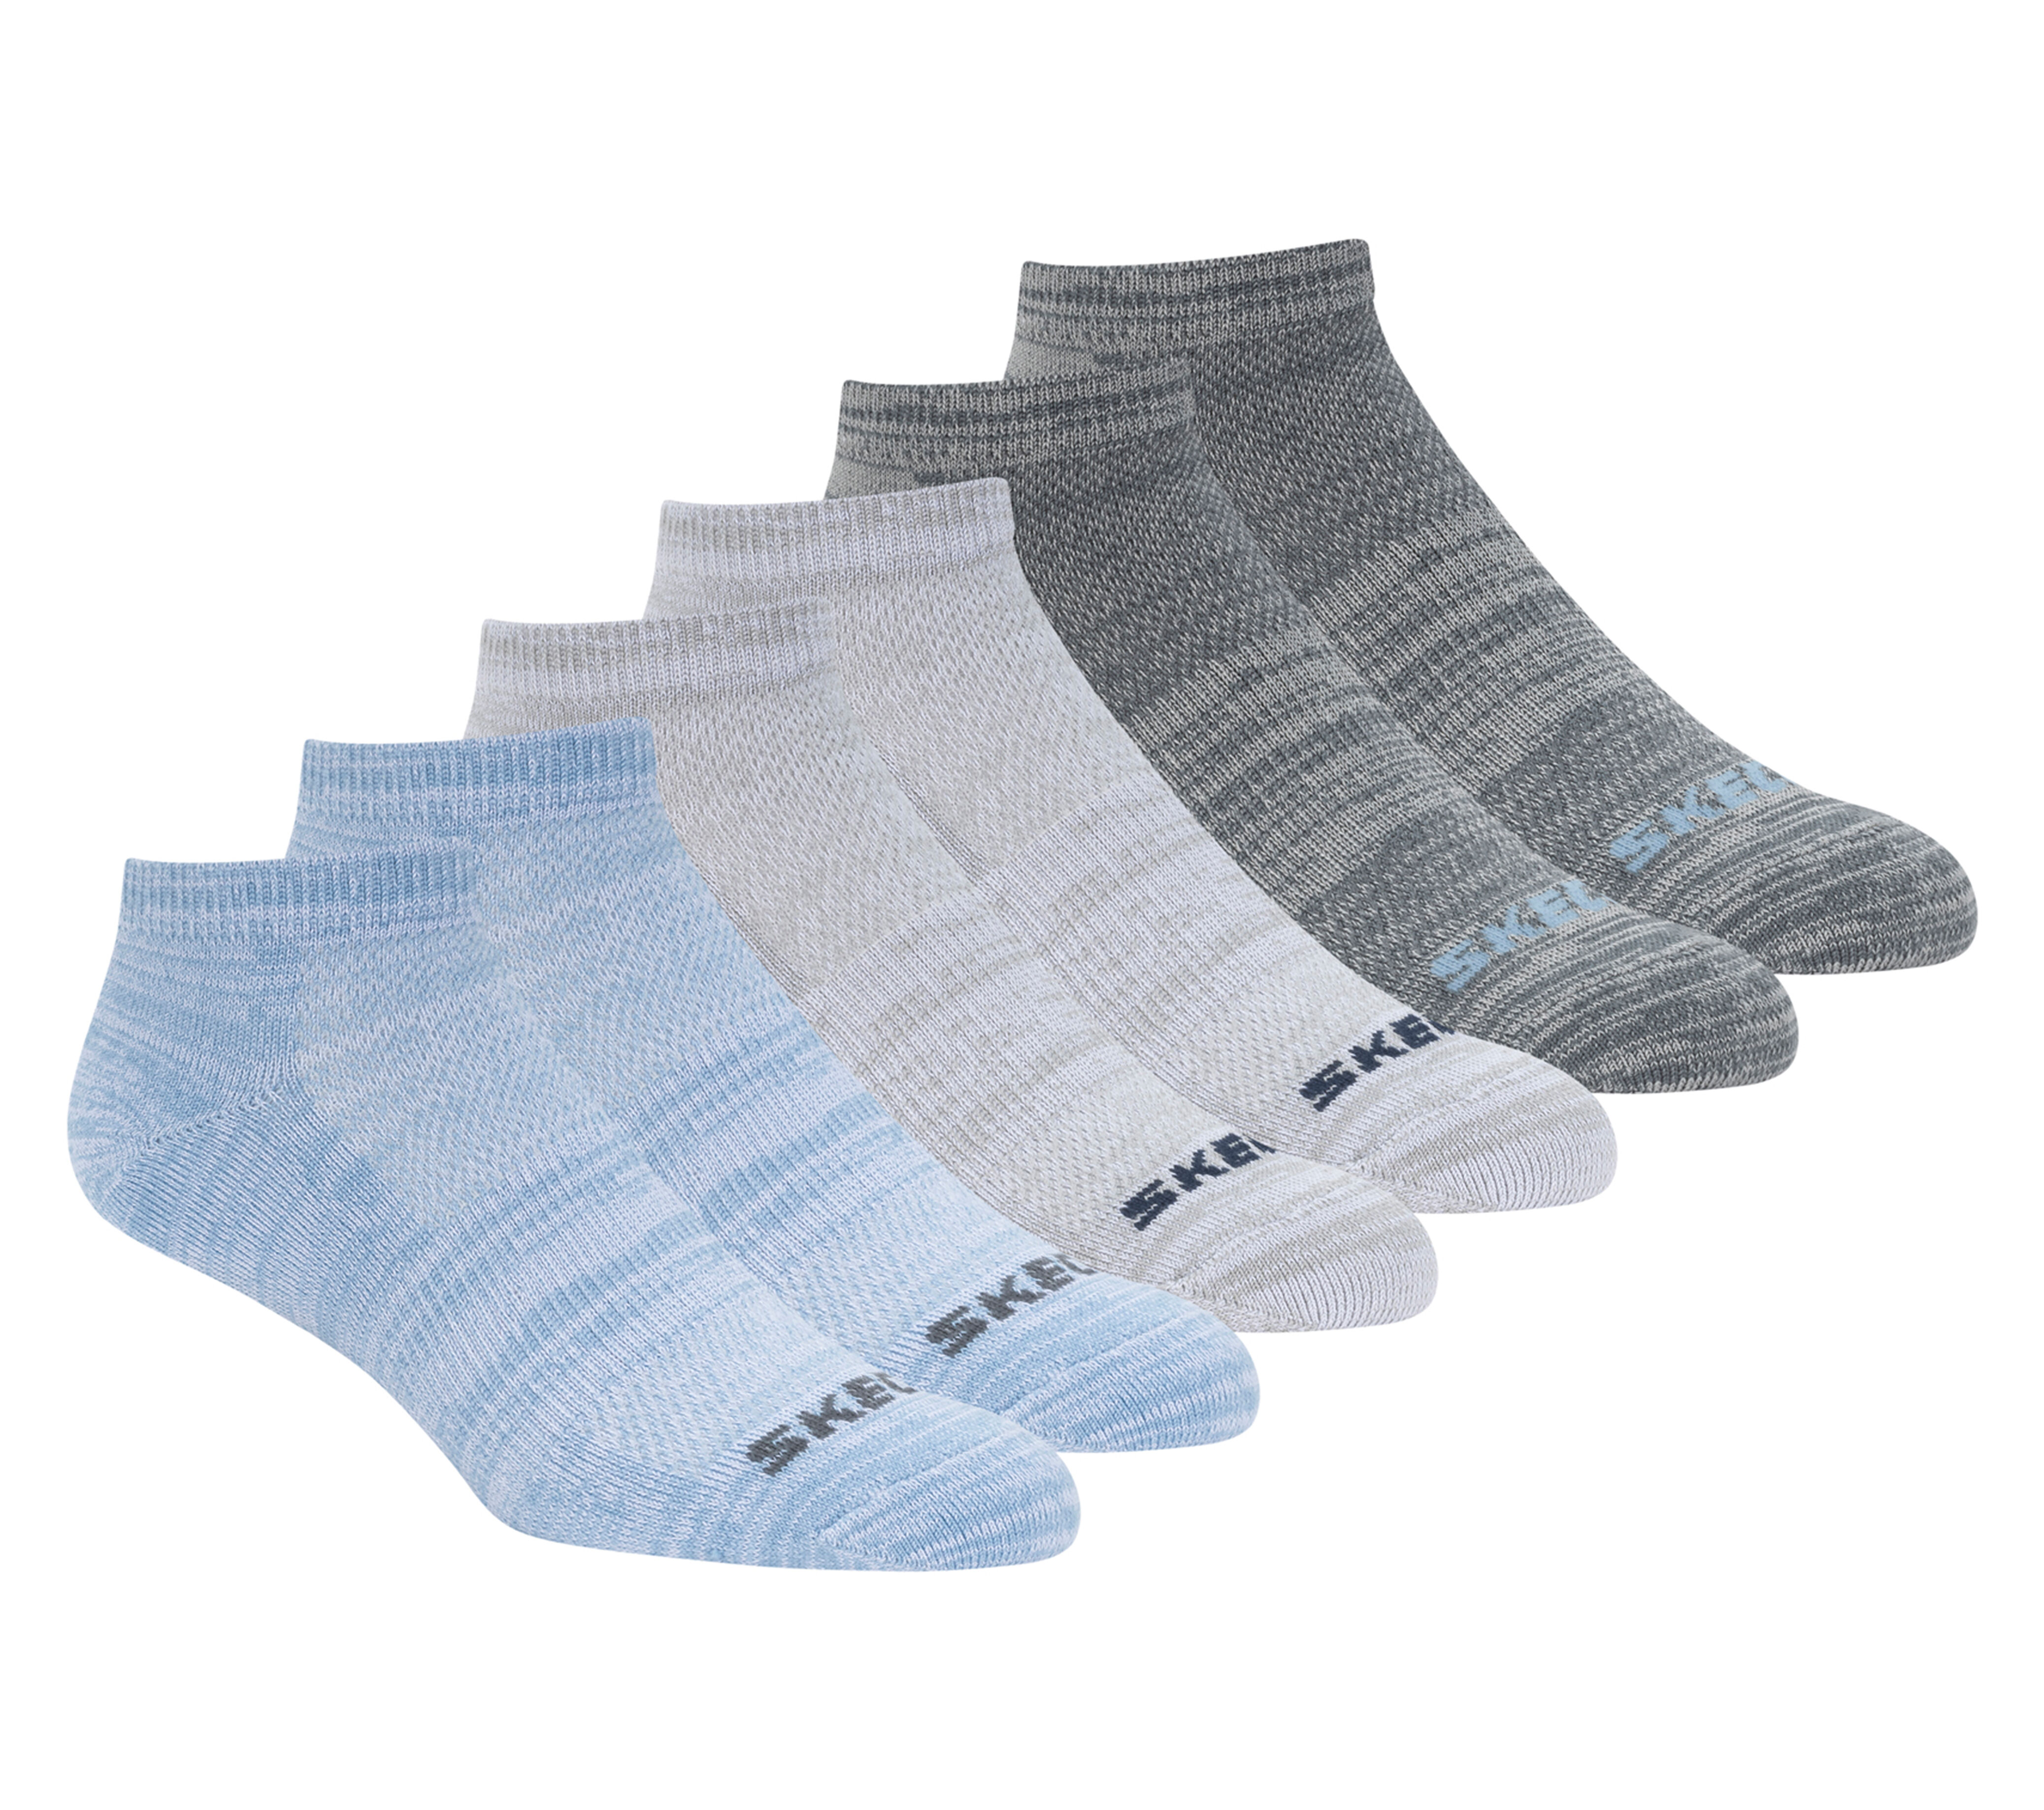 6 Pack Low Cut Non Terry Socks